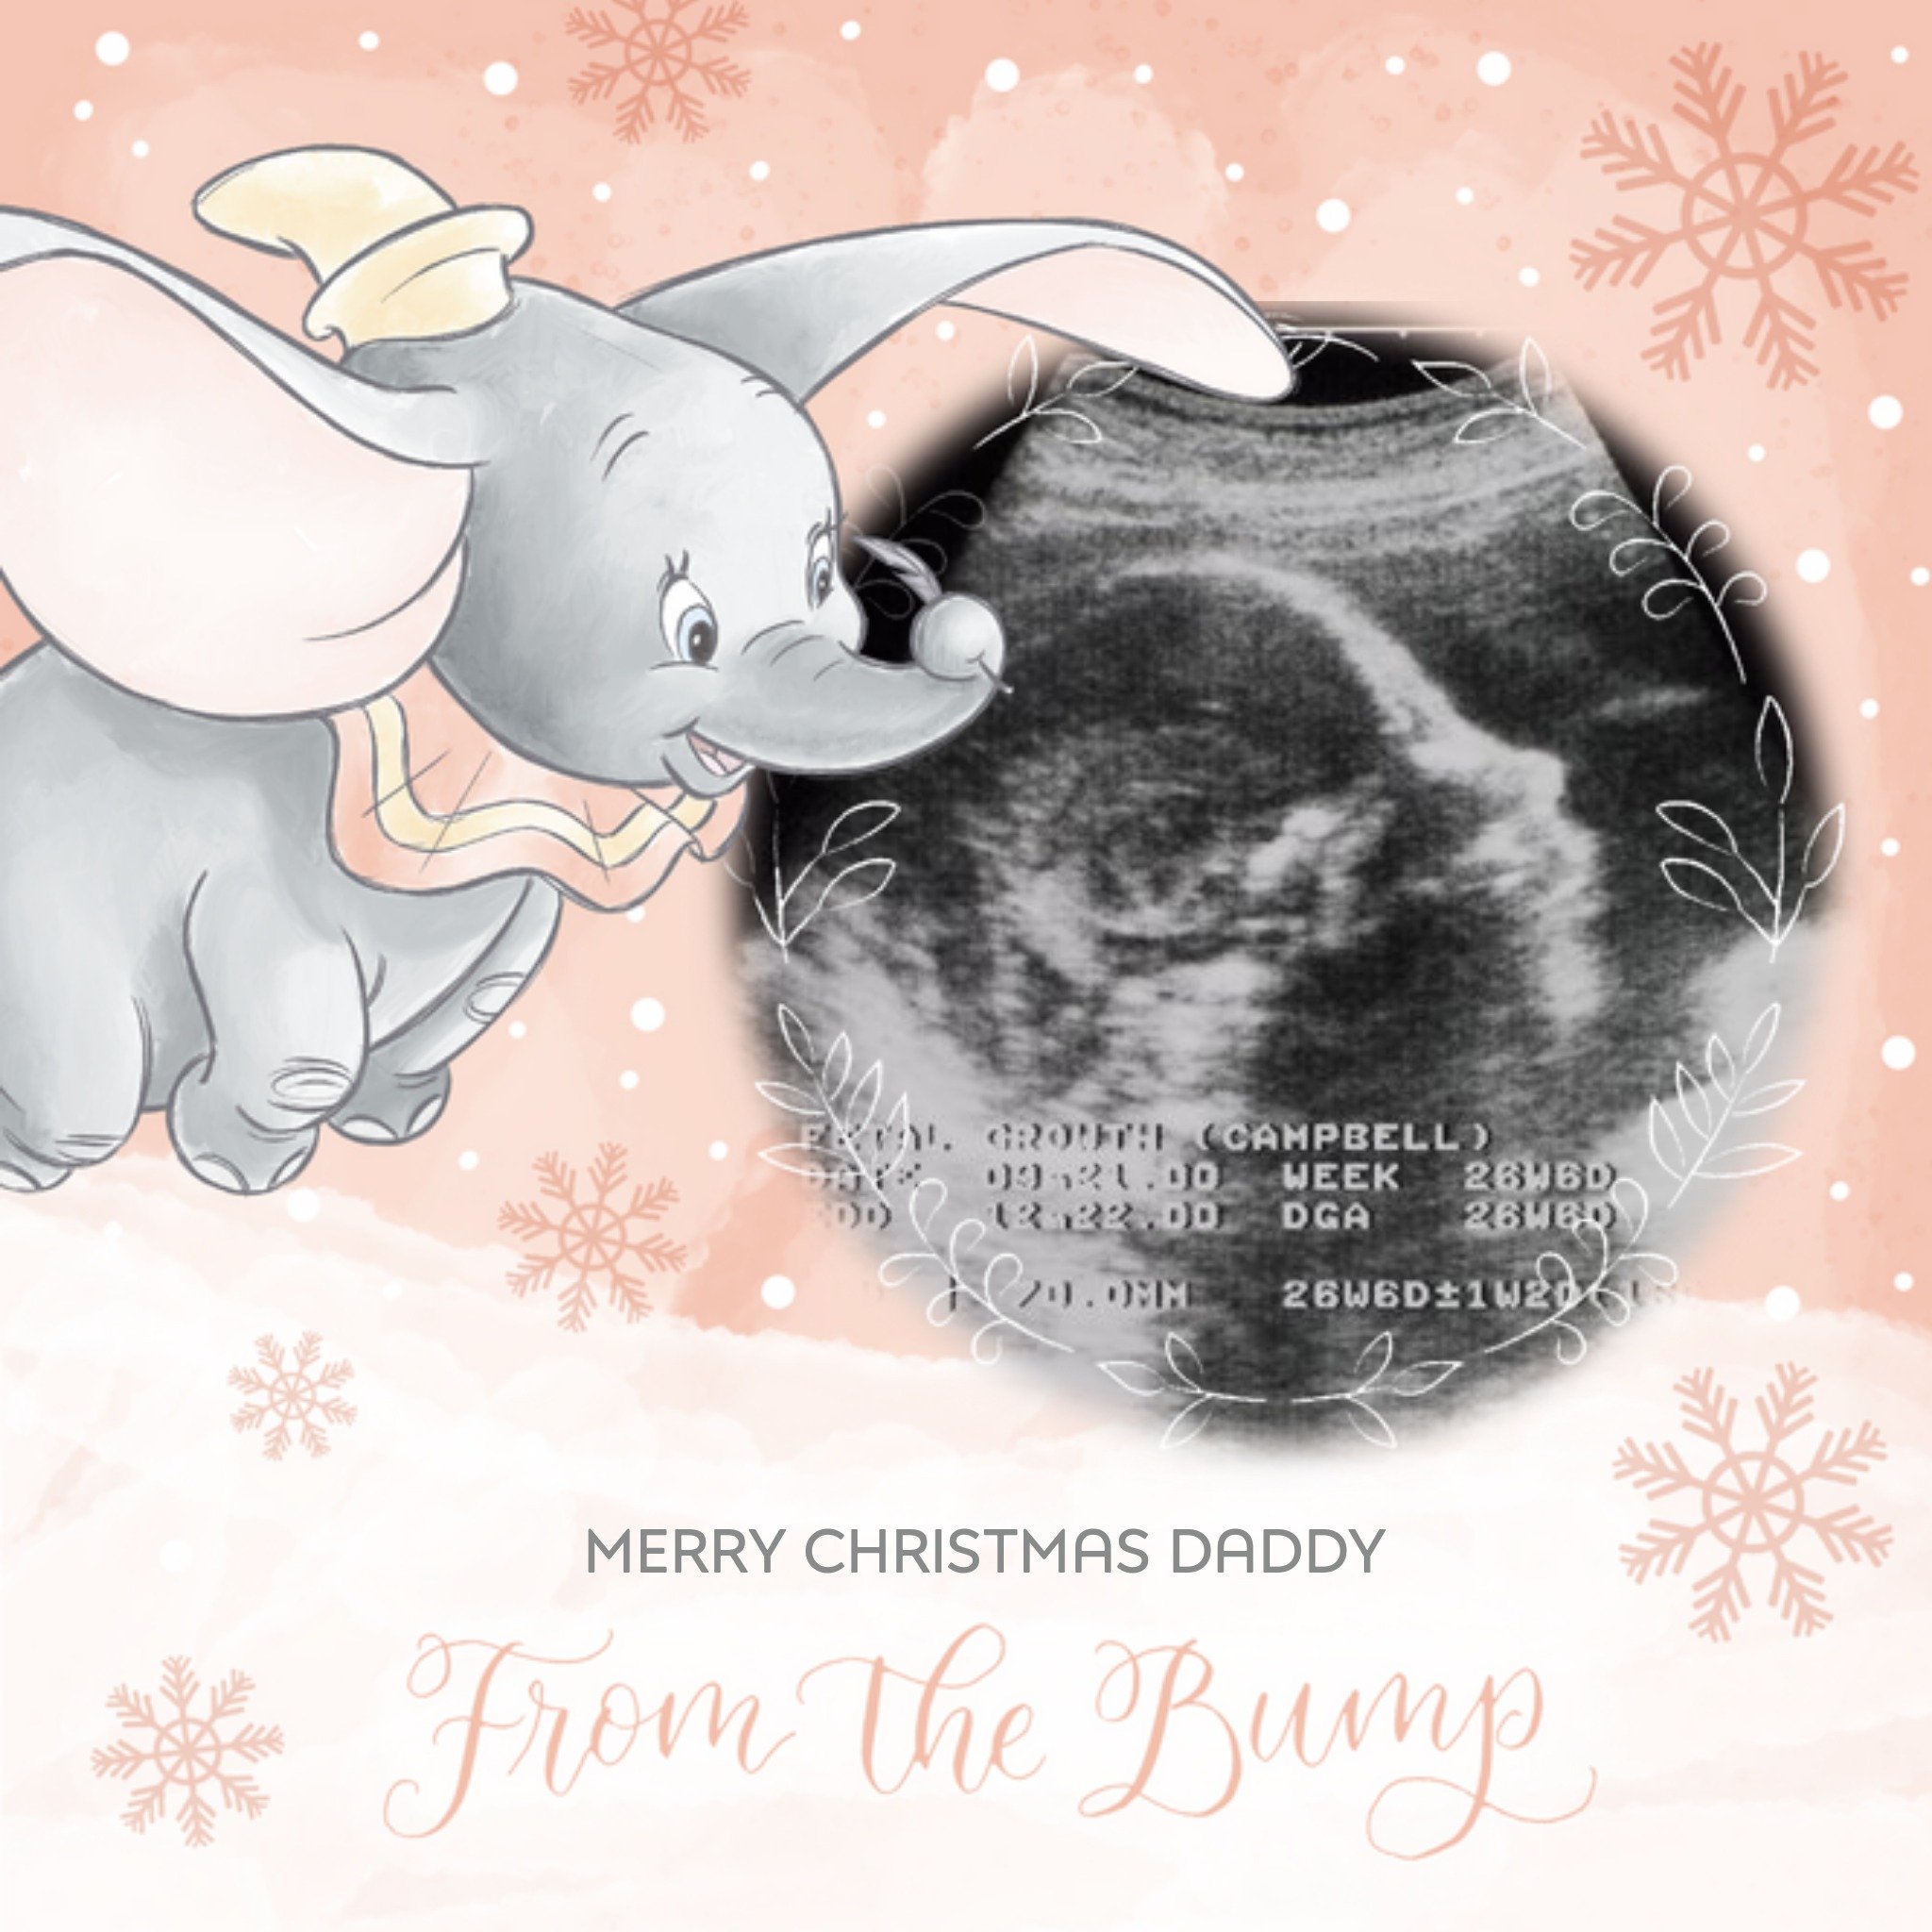 Disney Dumbo Merry Christmas Card From Bump To Daddy, Large